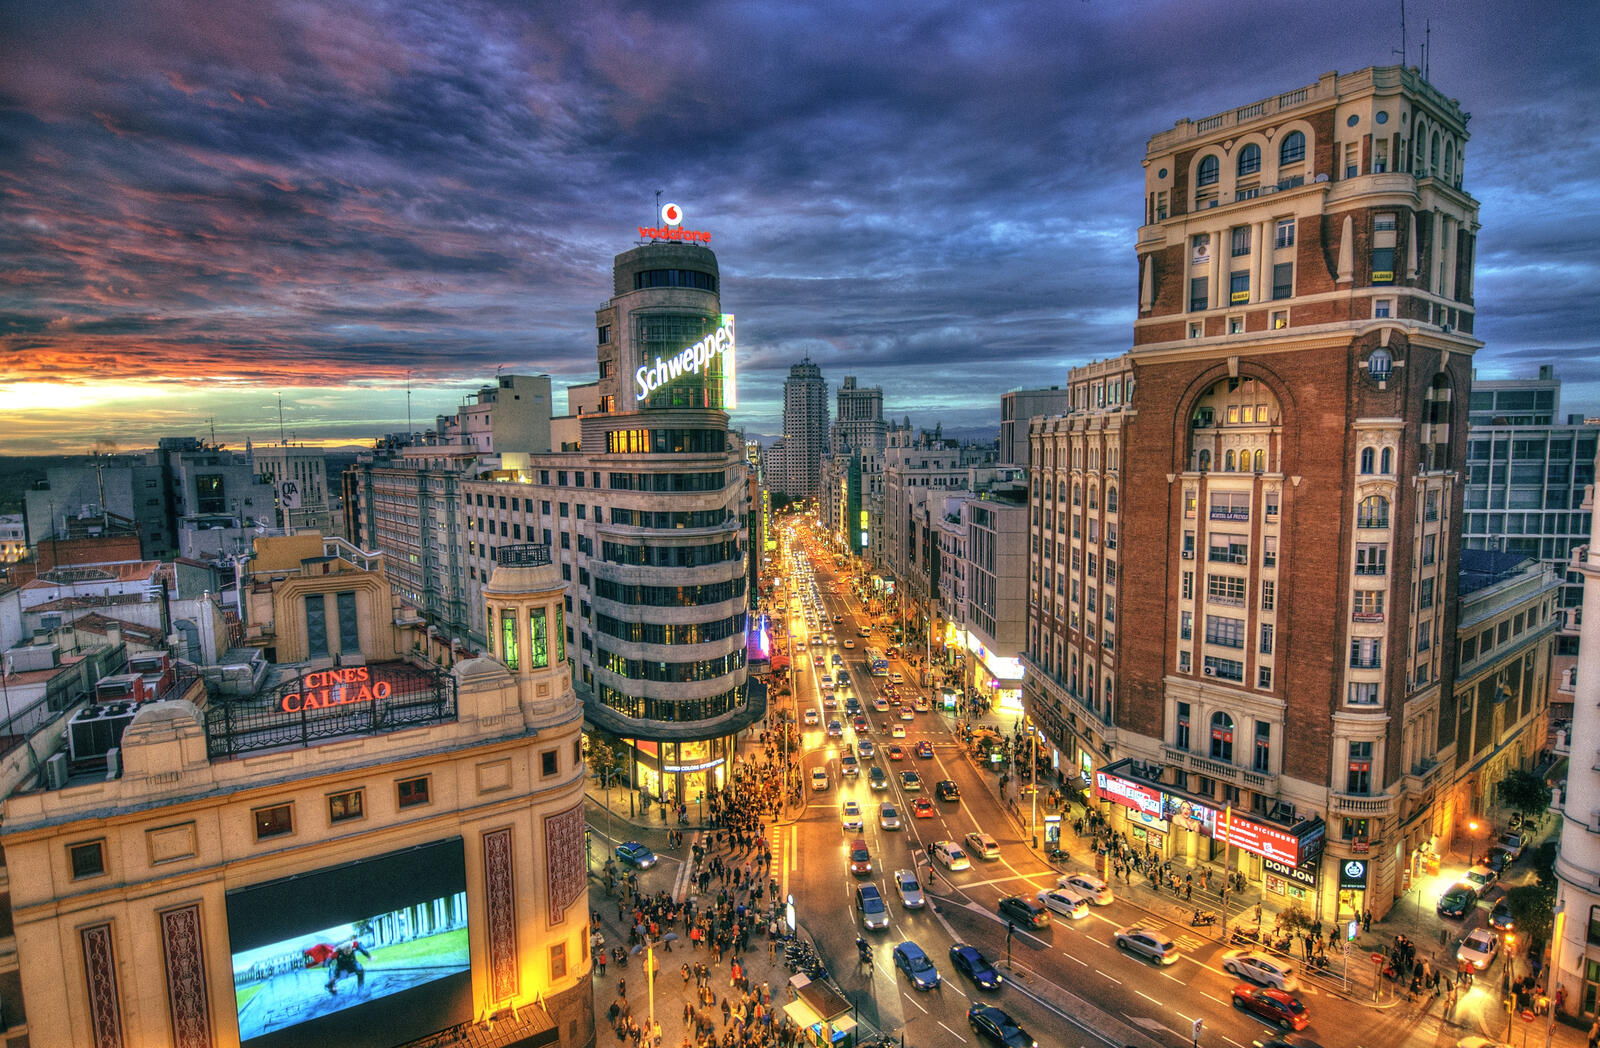 Wallpapers view of the Plaza de Callao cityscape evening on the desktop